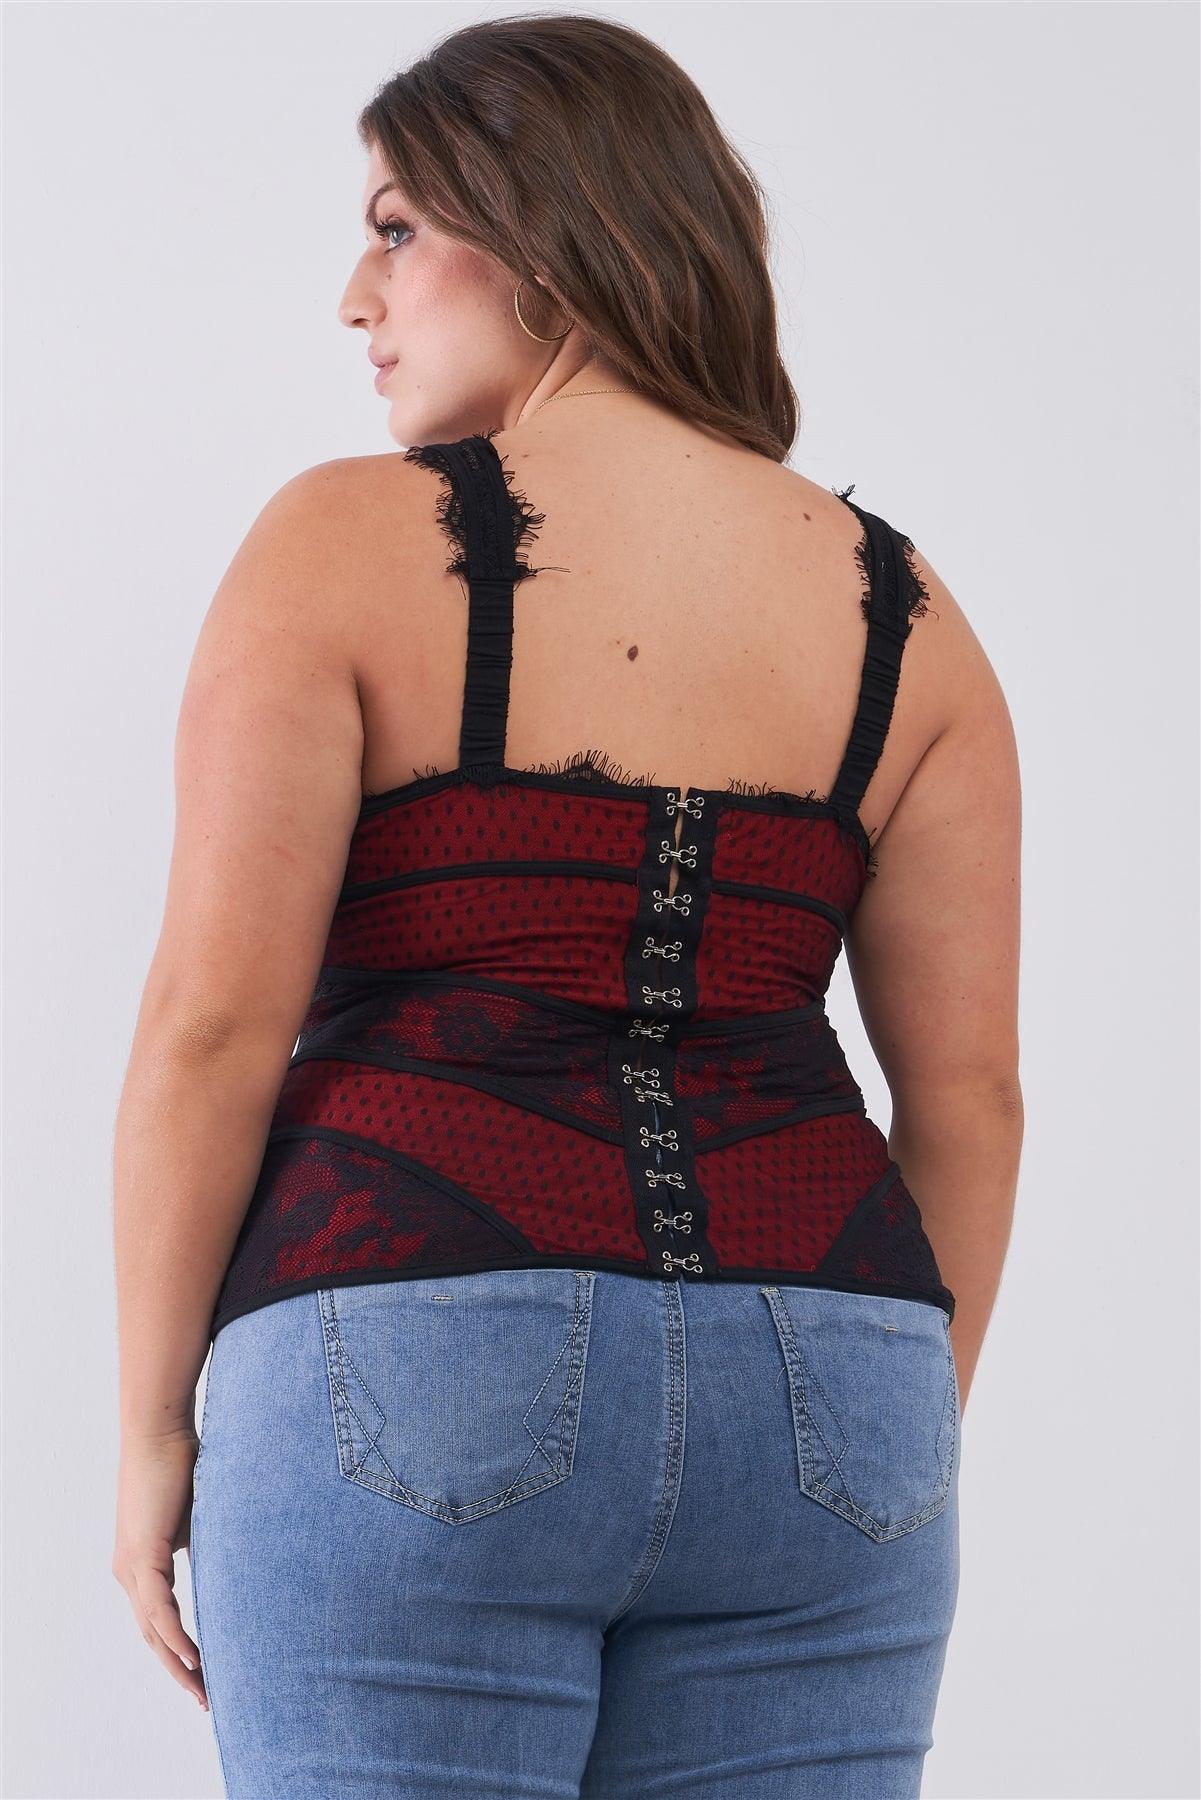 Junior Plus Size Red & Black Sleeveless Polka Dot Pattern Lace Mesh Corseted Top